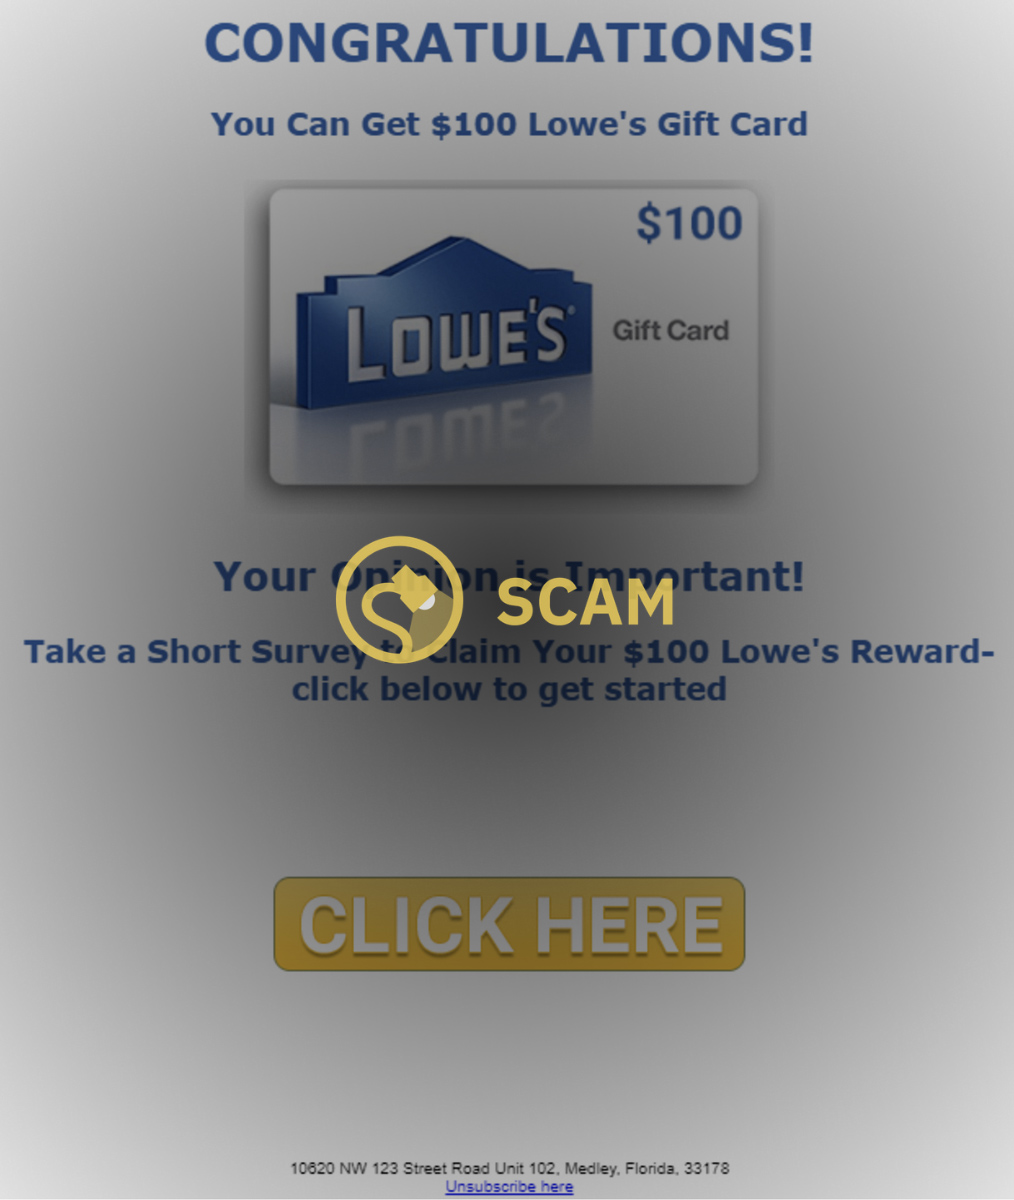 A scam email claimed to give a $100 Lowe's gift card for anyone who took a survey.